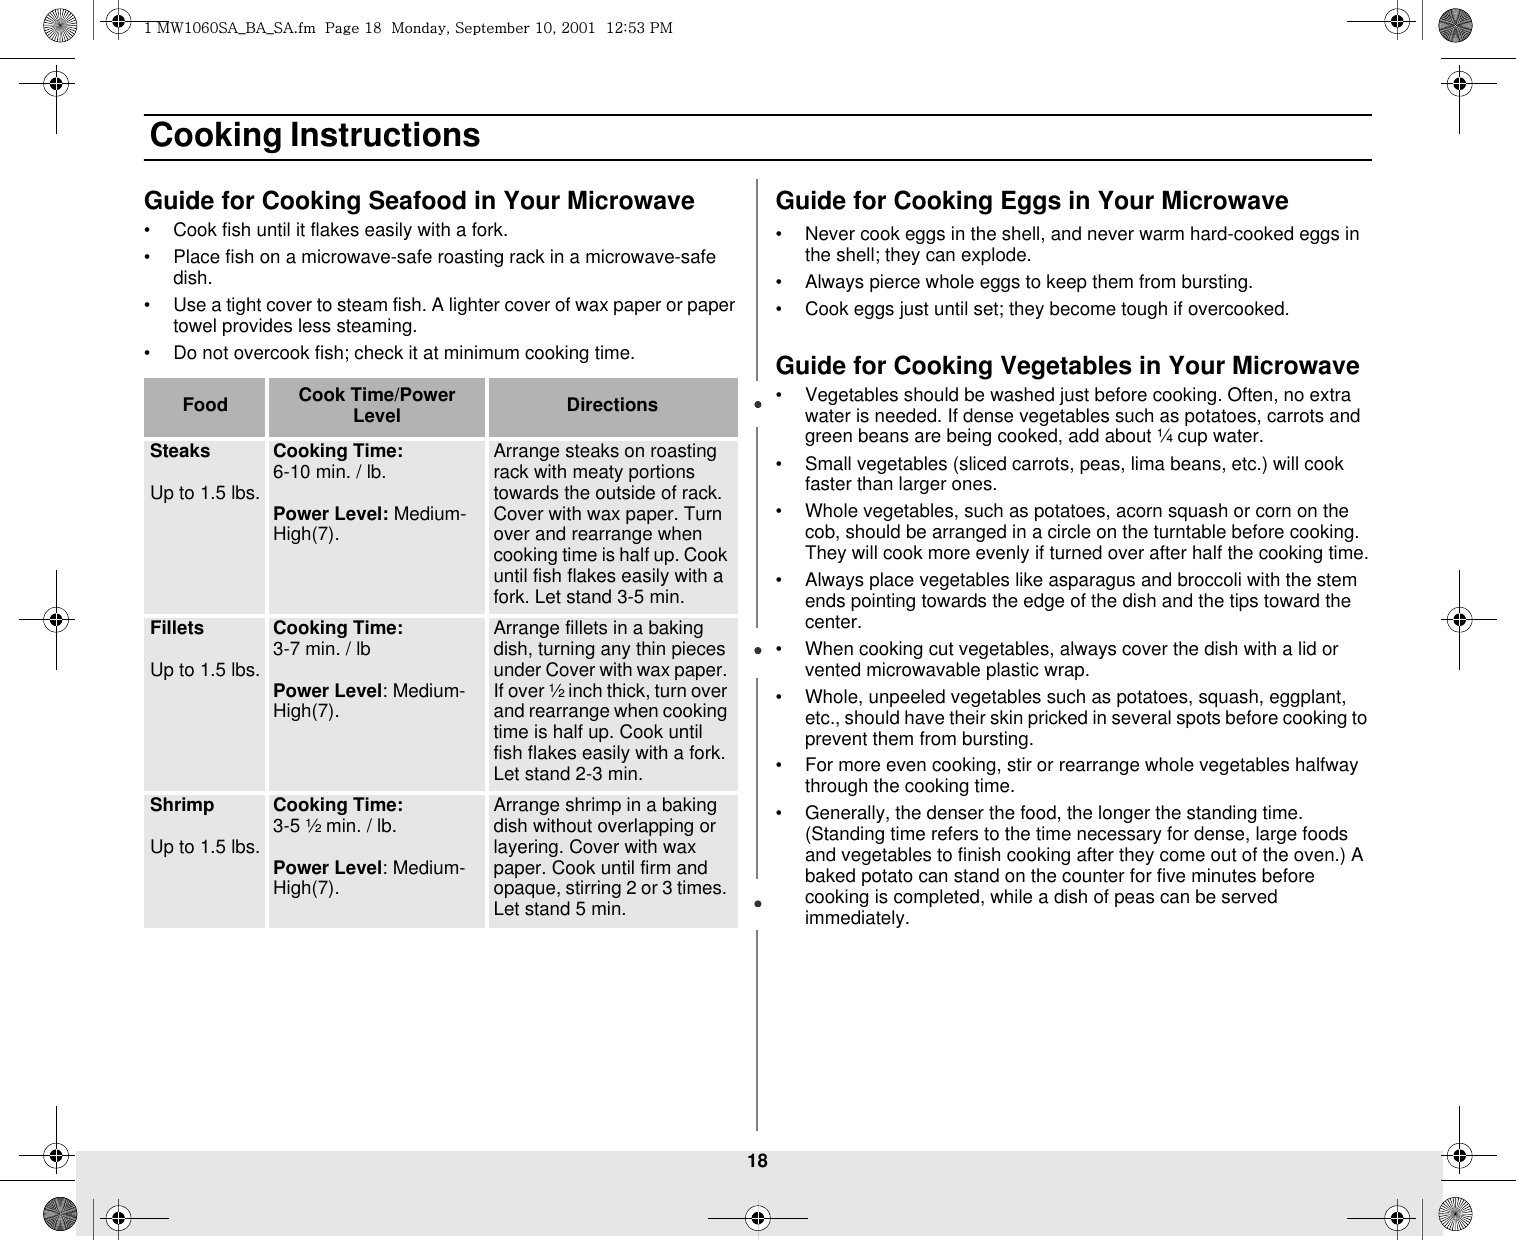 18 Cooking InstructionsGuide for Cooking Seafood in Your Microwave•Cook fish until it flakes easily with a fork.•Place fish on a microwave-safe roasting rack in a microwave-safe dish.•Use a tight cover to steam fish. A lighter cover of wax paper or paper towel provides less steaming.•Do not overcook fish; check it at minimum cooking time.Guide for Cooking Eggs in Your Microwave•Never cook eggs in the shell, and never warm hard-cooked eggs in the shell; they can explode.•Always pierce whole eggs to keep them from bursting.•Cook eggs just until set; they become tough if overcooked.Guide for Cooking Vegetables in Your Microwave•Vegetables should be washed just before cooking. Often, no extra water is needed. If dense vegetables such as potatoes, carrots and green beans are being cooked, add about ¼ cup water.•Small vegetables (sliced carrots, peas, lima beans, etc.) will cook faster than larger ones.•Whole vegetables, such as potatoes, acorn squash or corn on the cob, should be arranged in a circle on the turntable before cooking. They will cook more evenly if turned over after half the cooking time.•Always place vegetables like asparagus and broccoli with the stem ends pointing towards the edge of the dish and the tips toward the center.•When cooking cut vegetables, always cover the dish with a lid or vented microwavable plastic wrap.•Whole, unpeeled vegetables such as potatoes, squash, eggplant, etc., should have their skin pricked in several spots before cooking to prevent them from bursting.•For more even cooking, stir or rearrange whole vegetables halfway through the cooking time.•Generally, the denser the food, the longer the standing time. (Standing time refers to the time necessary for dense, large foods and vegetables to finish cooking after they come out of the oven.) A baked potato can stand on the counter for five minutes before cooking is completed, while a dish of peas can be served immediately.Food Cook Time/Power Level DirectionsSteaksUp to 1.5 lbs.Cooking Time: 6-10 min. / lb. Power Level: Medium-High(7).Arrange steaks on roasting rack with meaty portions towards the outside of rack. Cover with wax paper. Turn over and rearrange when cooking time is half up. Cook until fish flakes easily with a fork. Let stand 3-5 min. FilletsUp to 1.5 lbs.Cooking Time: 3-7 min. / lbPower Level: Medium-High(7).Arrange fillets in a baking dish, turning any thin pieces under Cover with wax paper. If over ½ inch thick, turn over and rearrange when cooking time is half up. Cook until fish flakes easily with a fork. Let stand 2-3 min.ShrimpUp to 1.5 lbs.Cooking Time: 3-5 ½ min. / lb.Power Level: Medium-High(7).Arrange shrimp in a baking dish without overlapping or layering. Cover with wax paper. Cook until firm and opaque, stirring 2 or 3 times. Let stand 5 min. XGt~XW]WzhihzhUGGwGX_GGtSGzGXWSGYWWXGGXYa\ZGwt